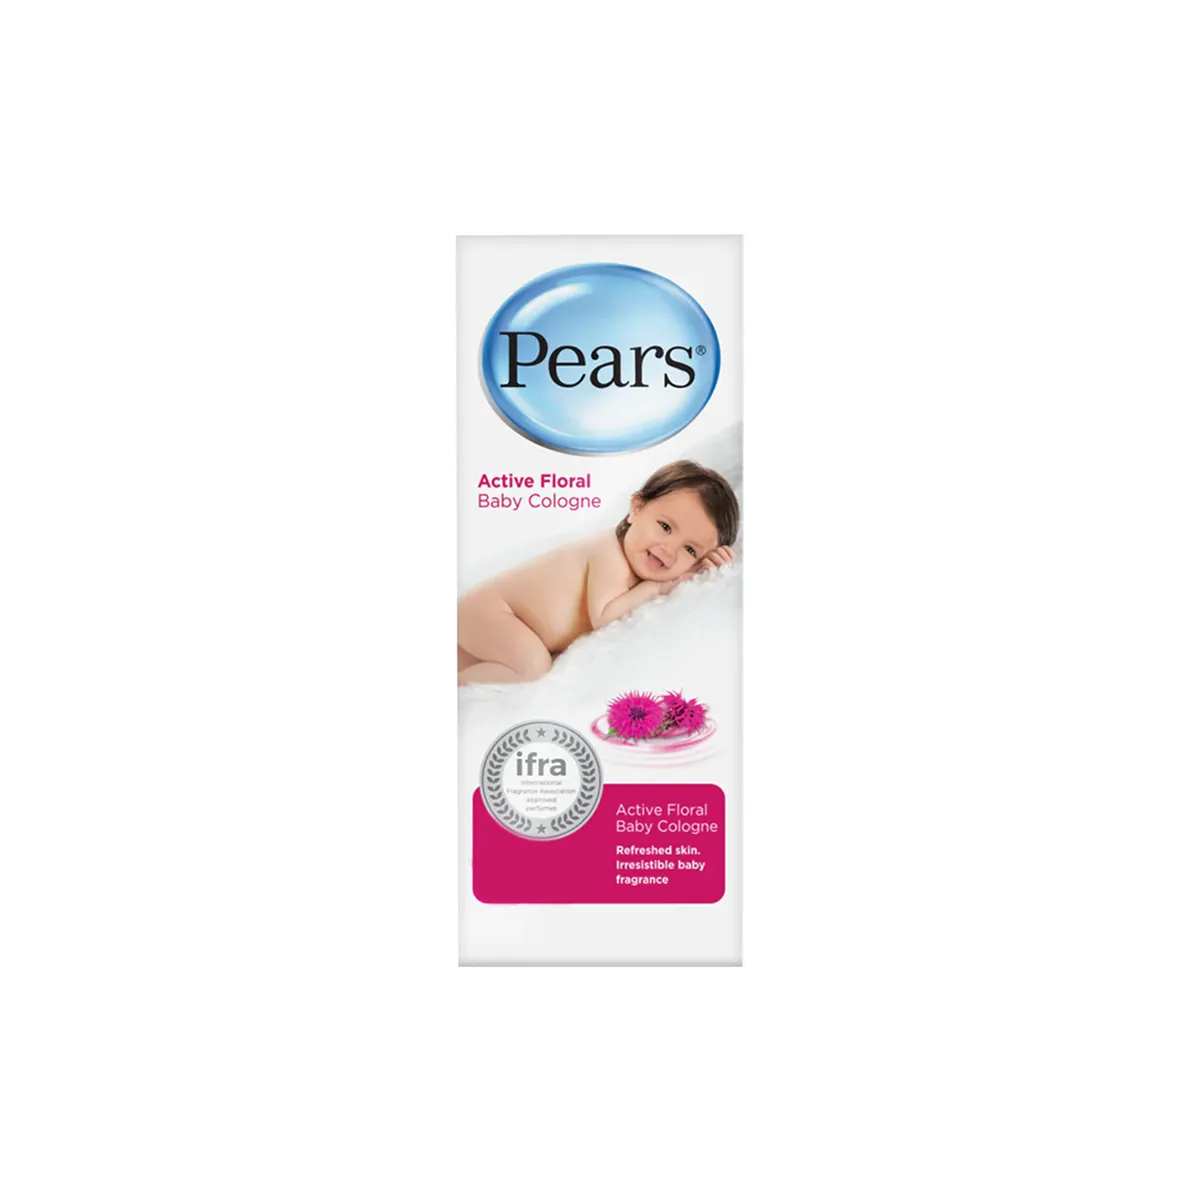 Pears Active Floral Baby Cologne 50ml